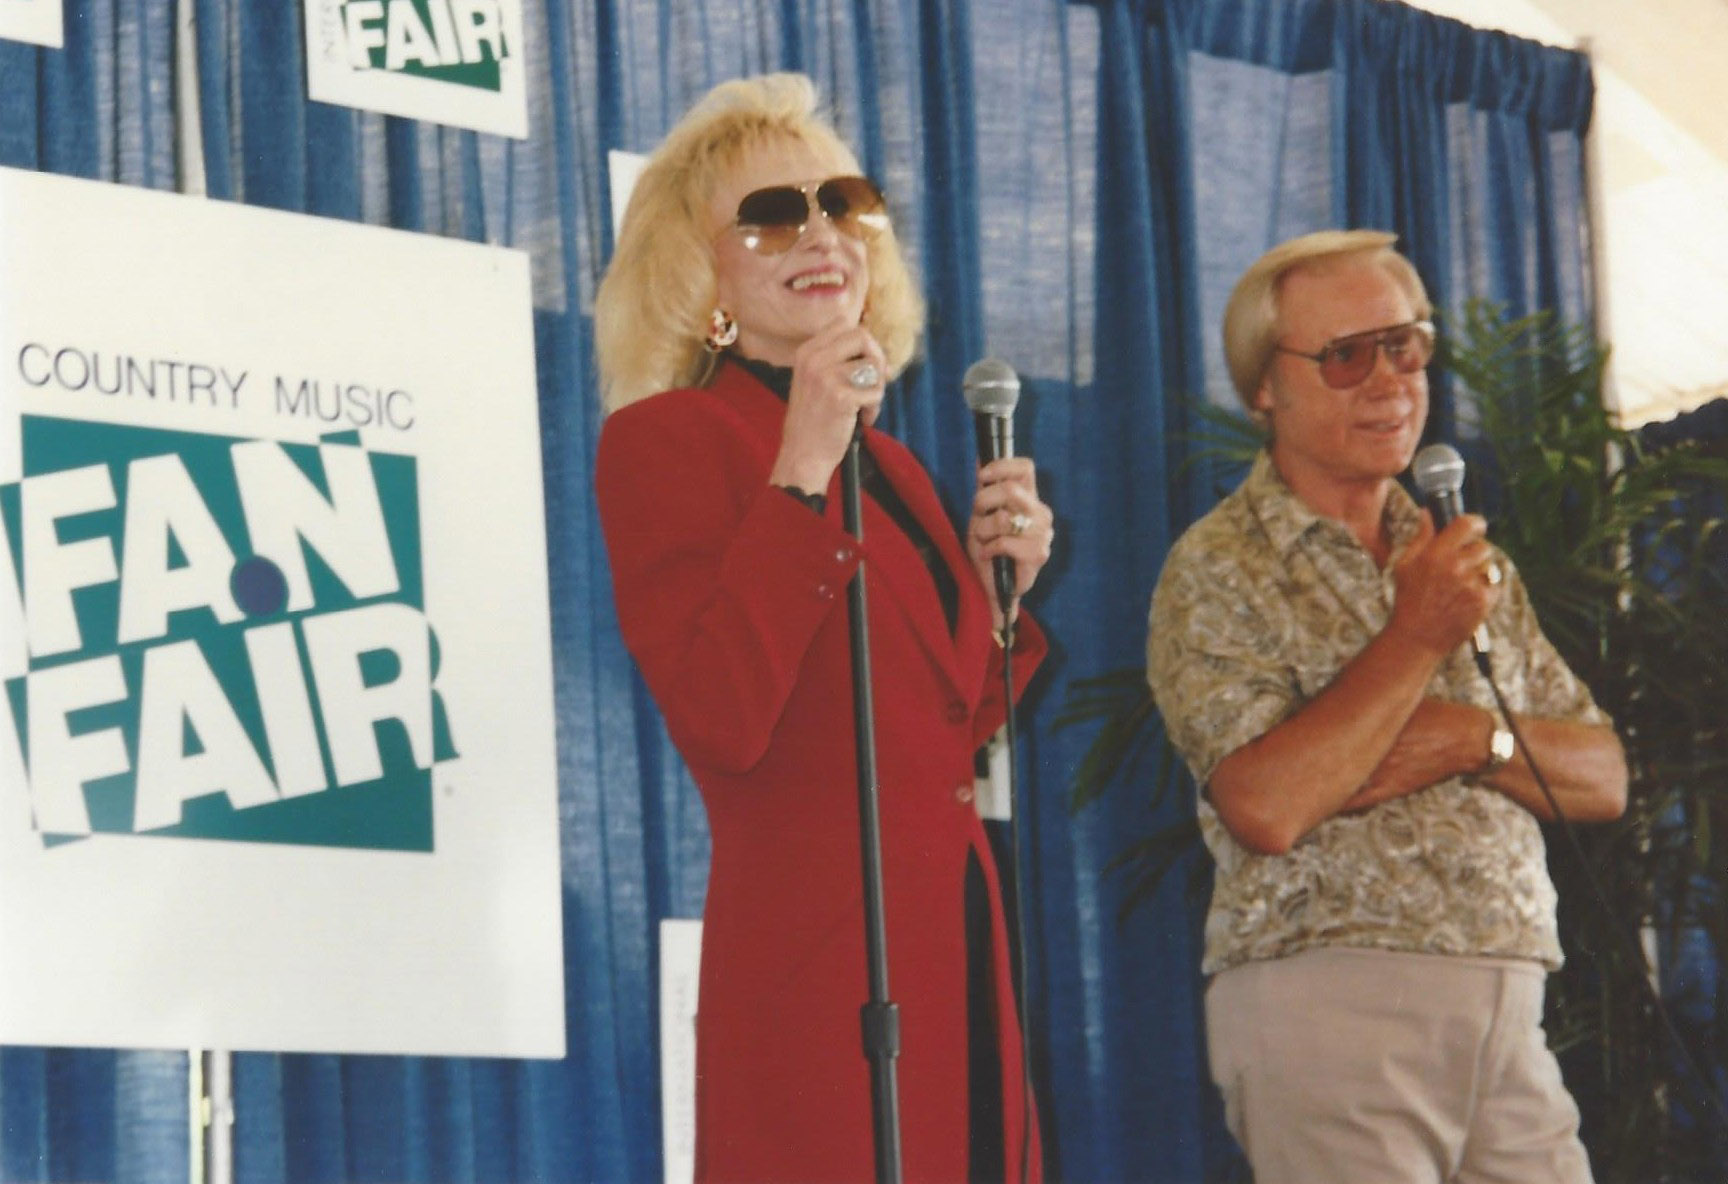 Tammy Wynette and George Jones at Fan Fair during the One reunion